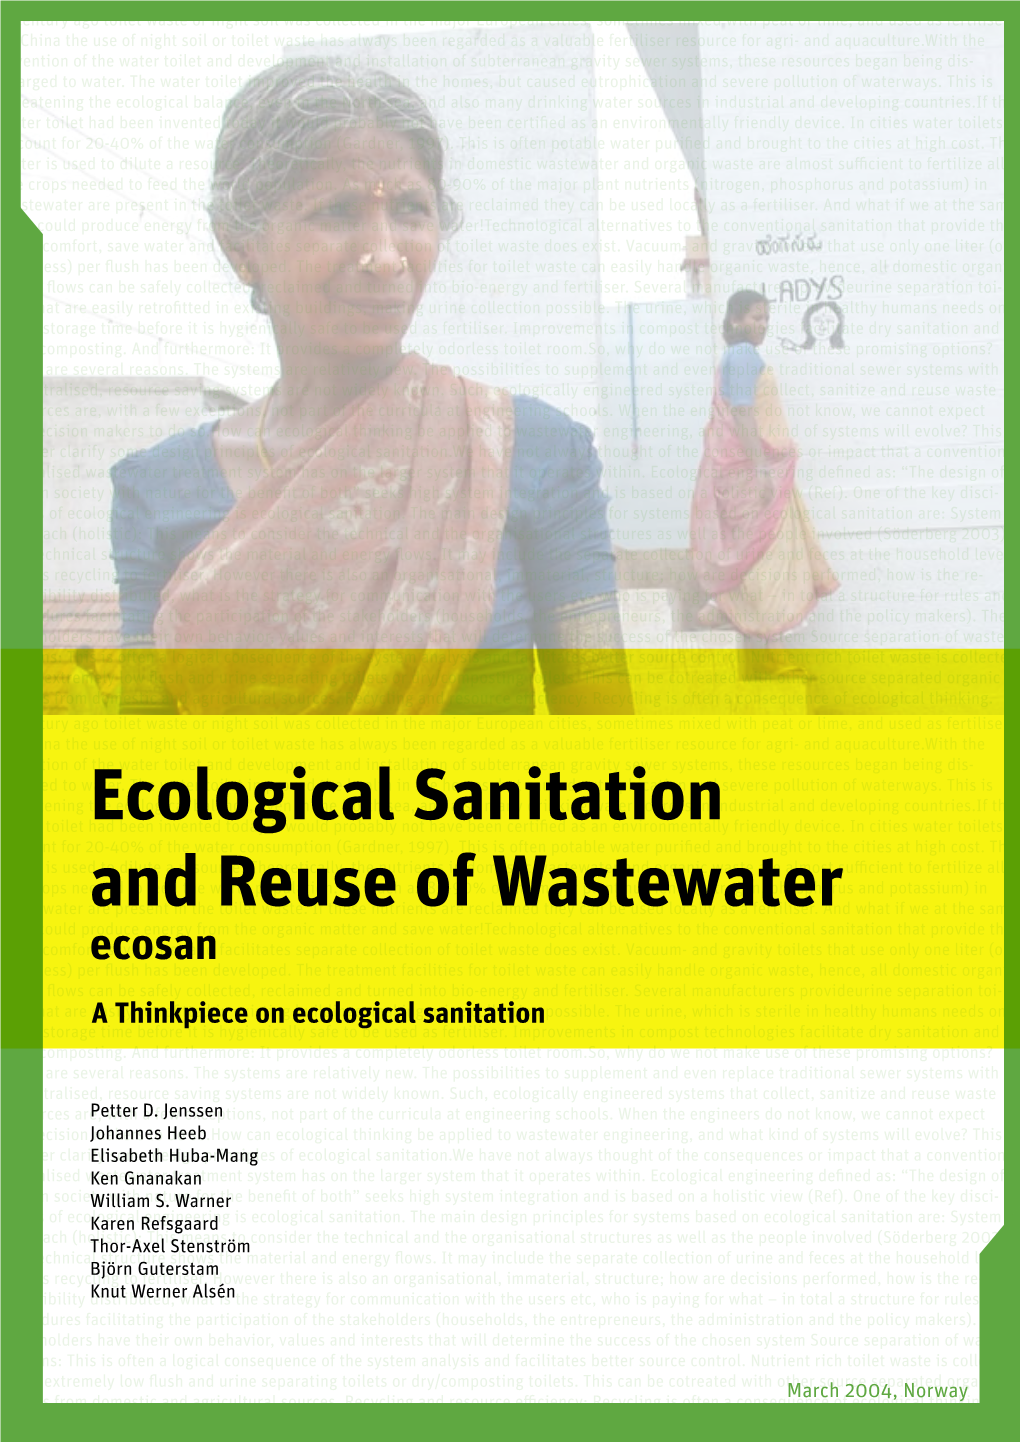 Ecological Sanitation and Reuse of Wastewater